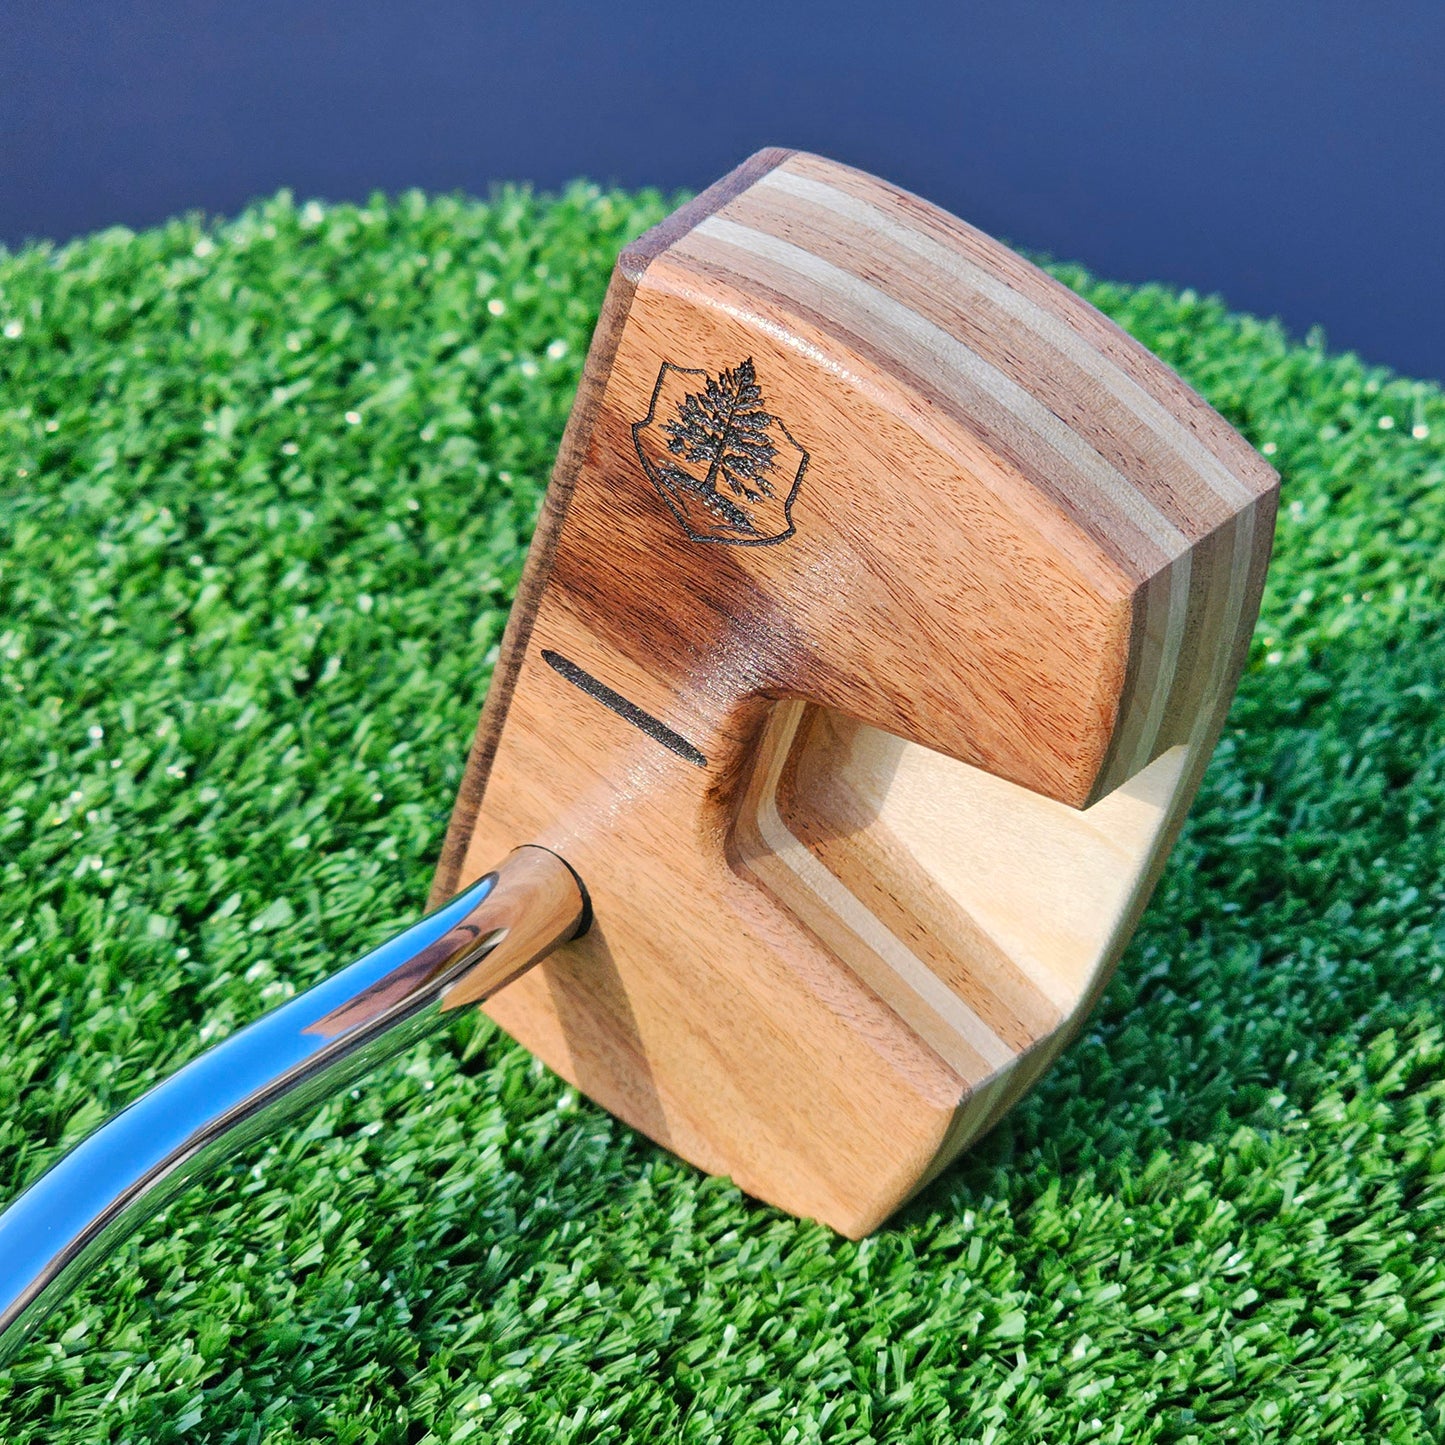 Bolivian Rosewood and multiwood body Woodrich Regal wood putter